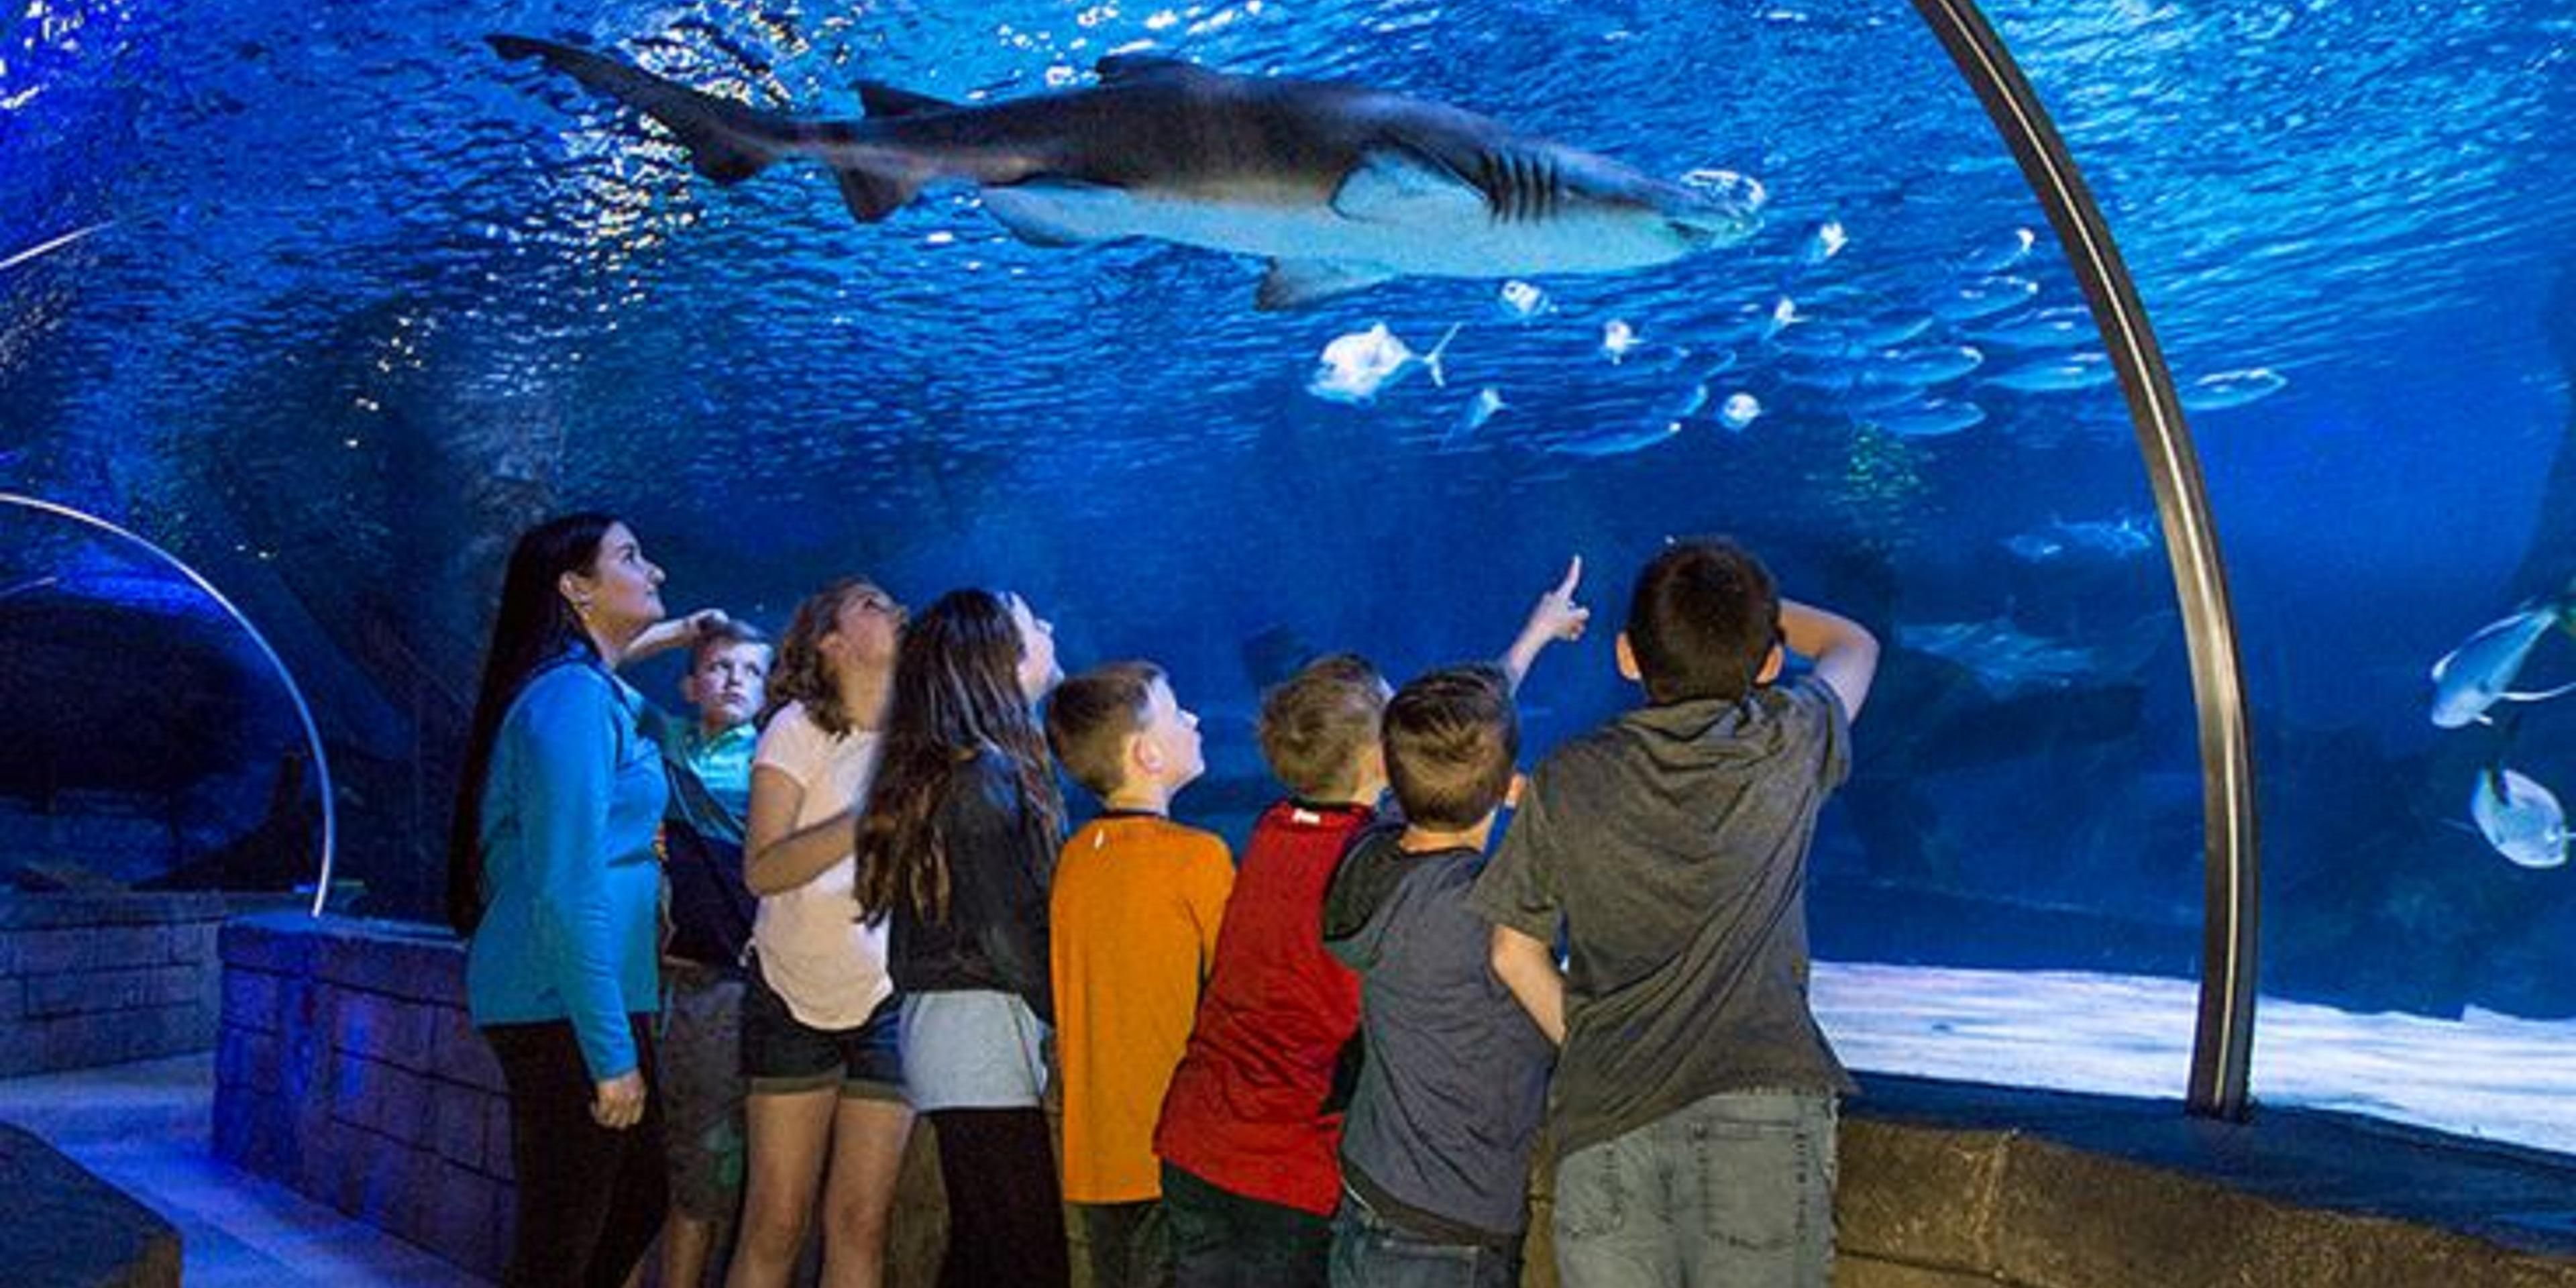 The Sea Life Aquarium in the Mall of America is home to over 10 thousand animals, and is over 70,000 square feet large. The hotel offers a shuttle to the Mall of America. 